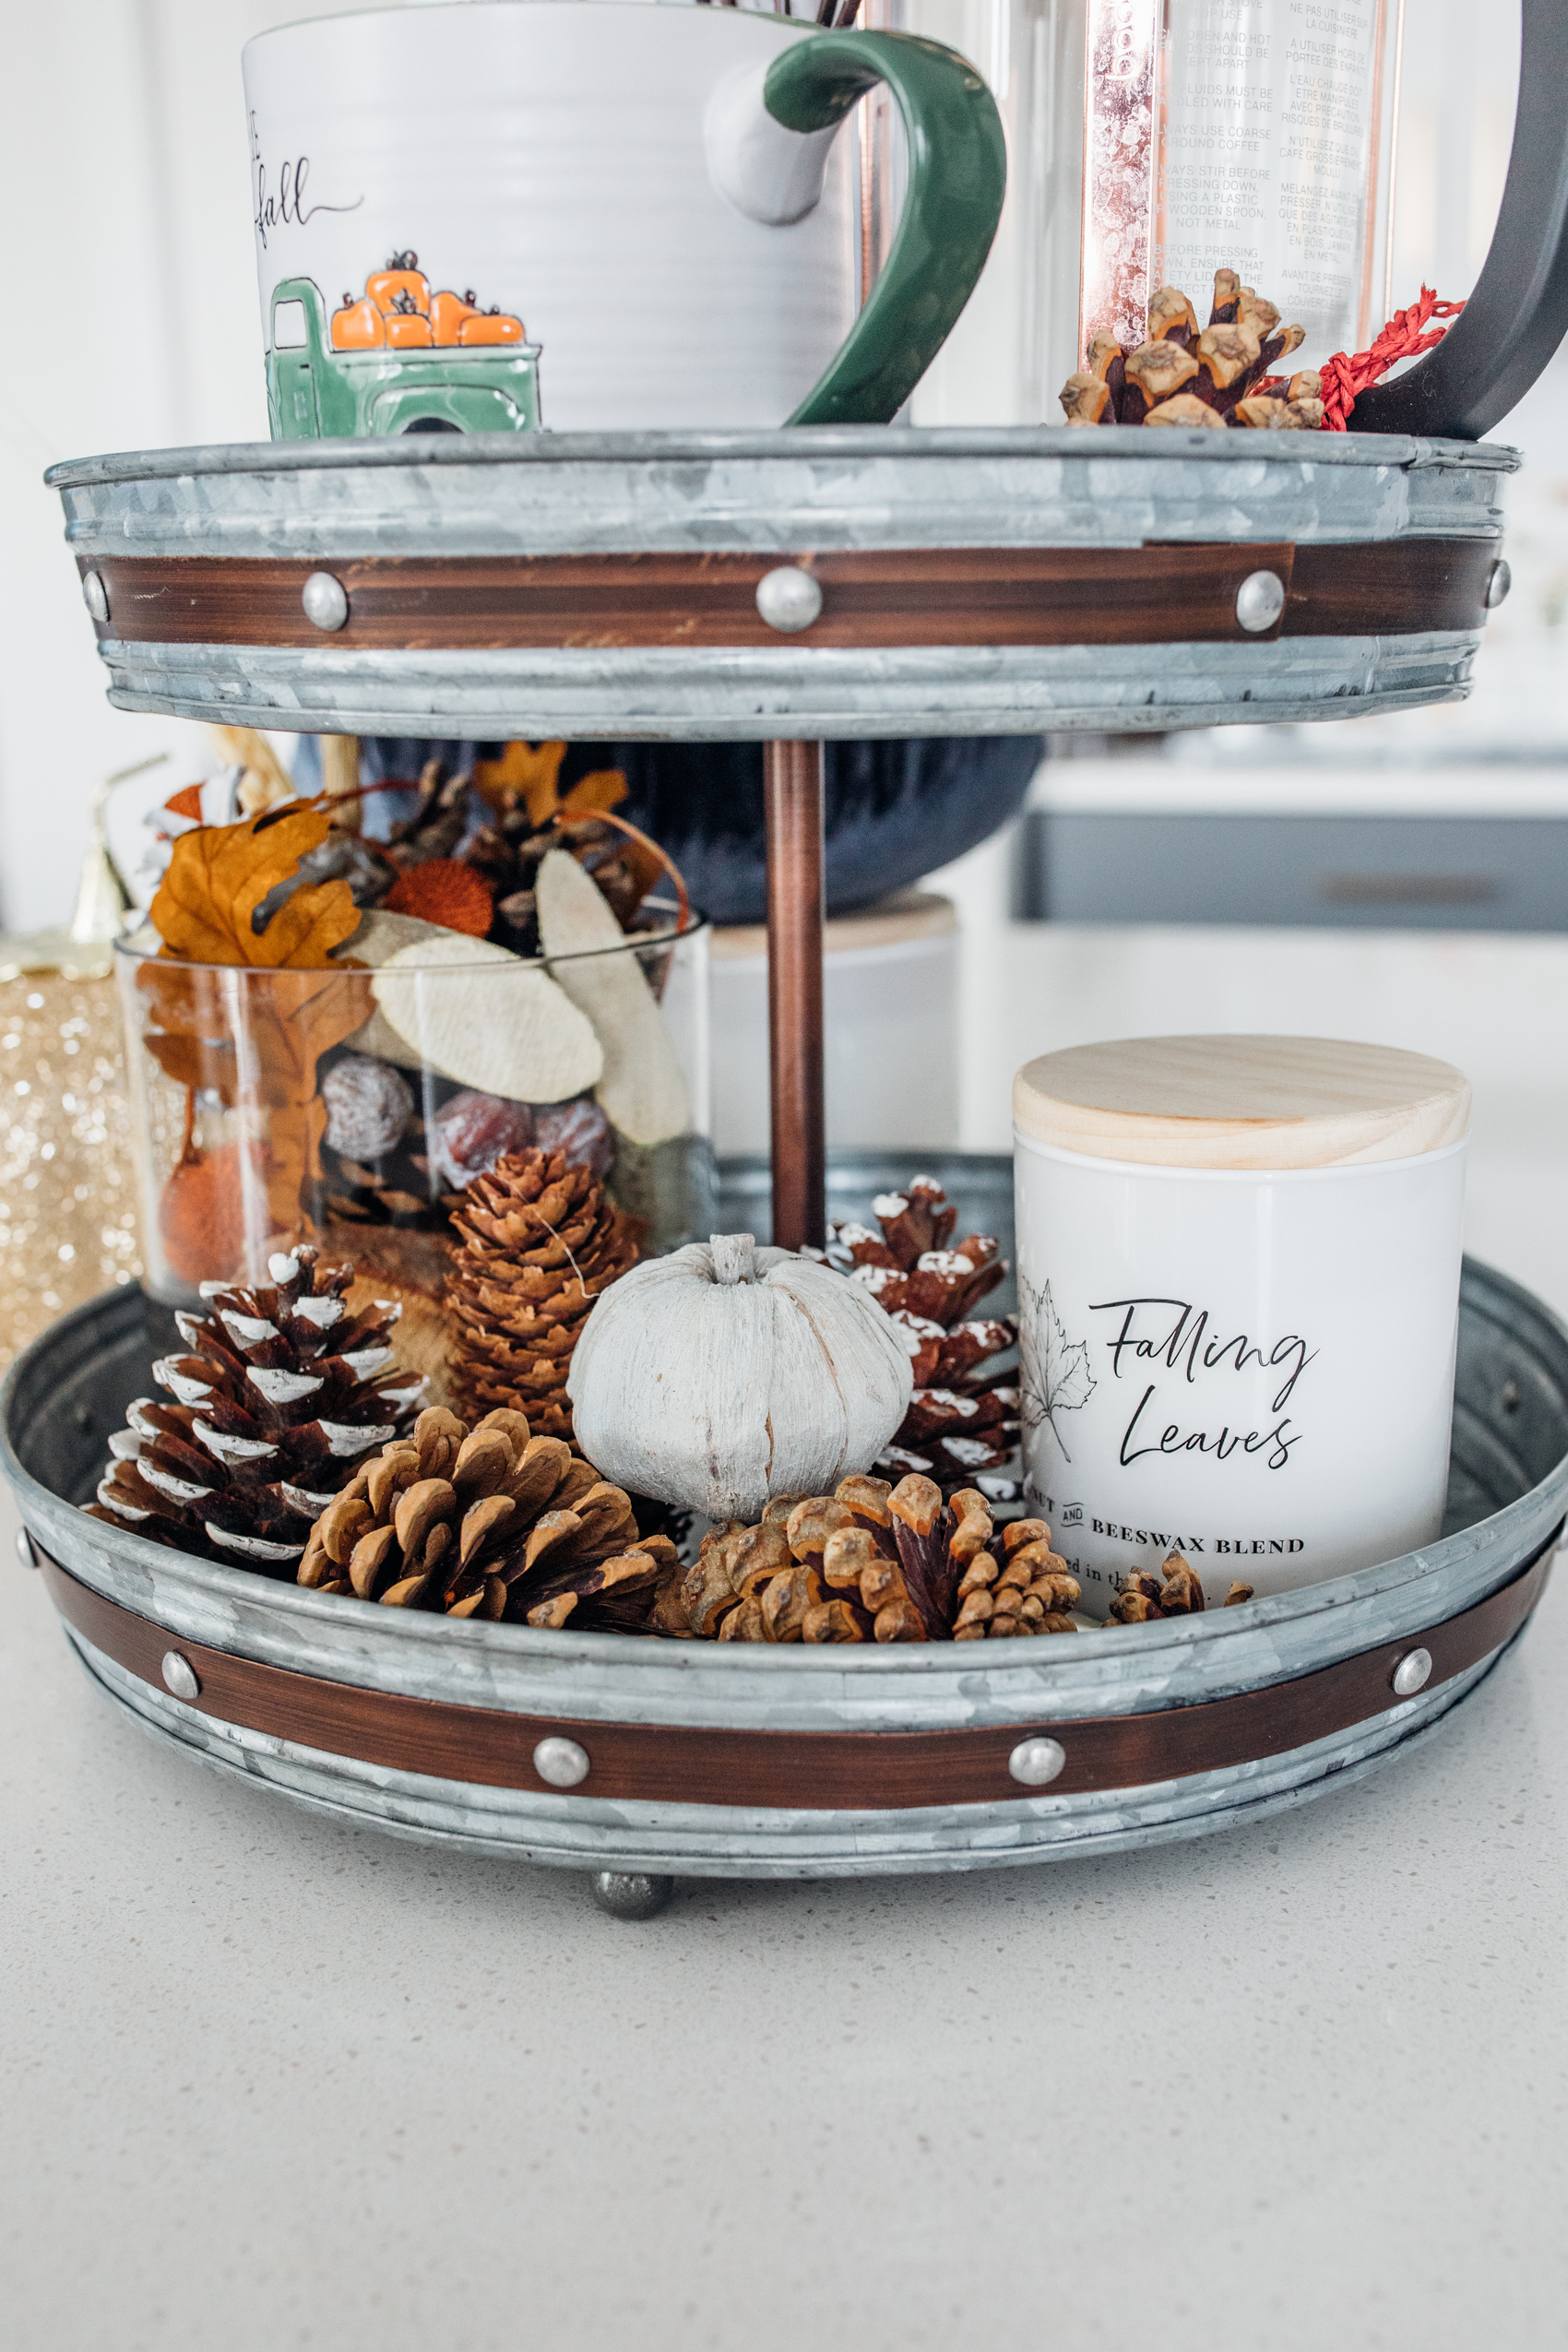 Fall kitchen table decor with pinecones, pumpkins and candles creating a centerpiece